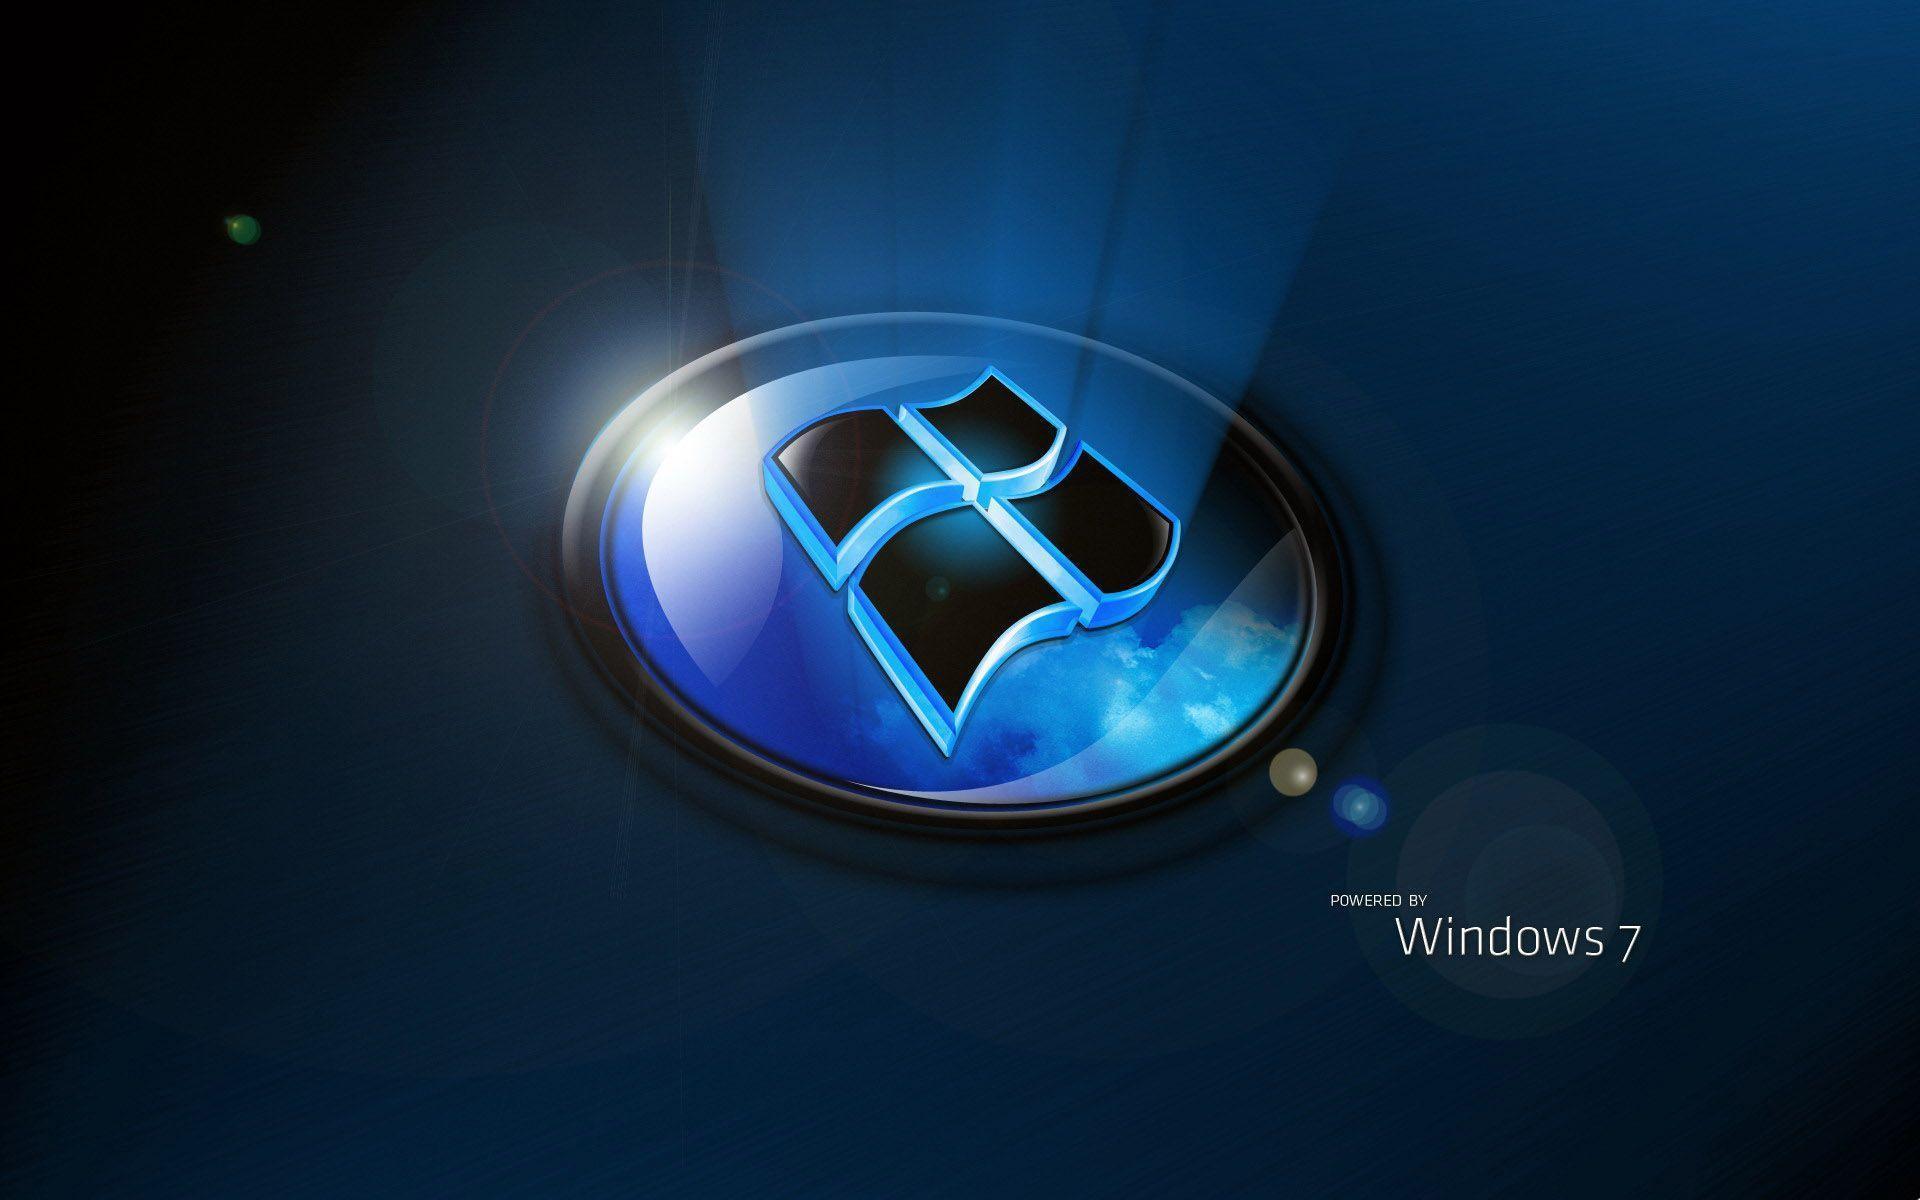 Wallpaper For > Awesome Windows 7 Wallpaper